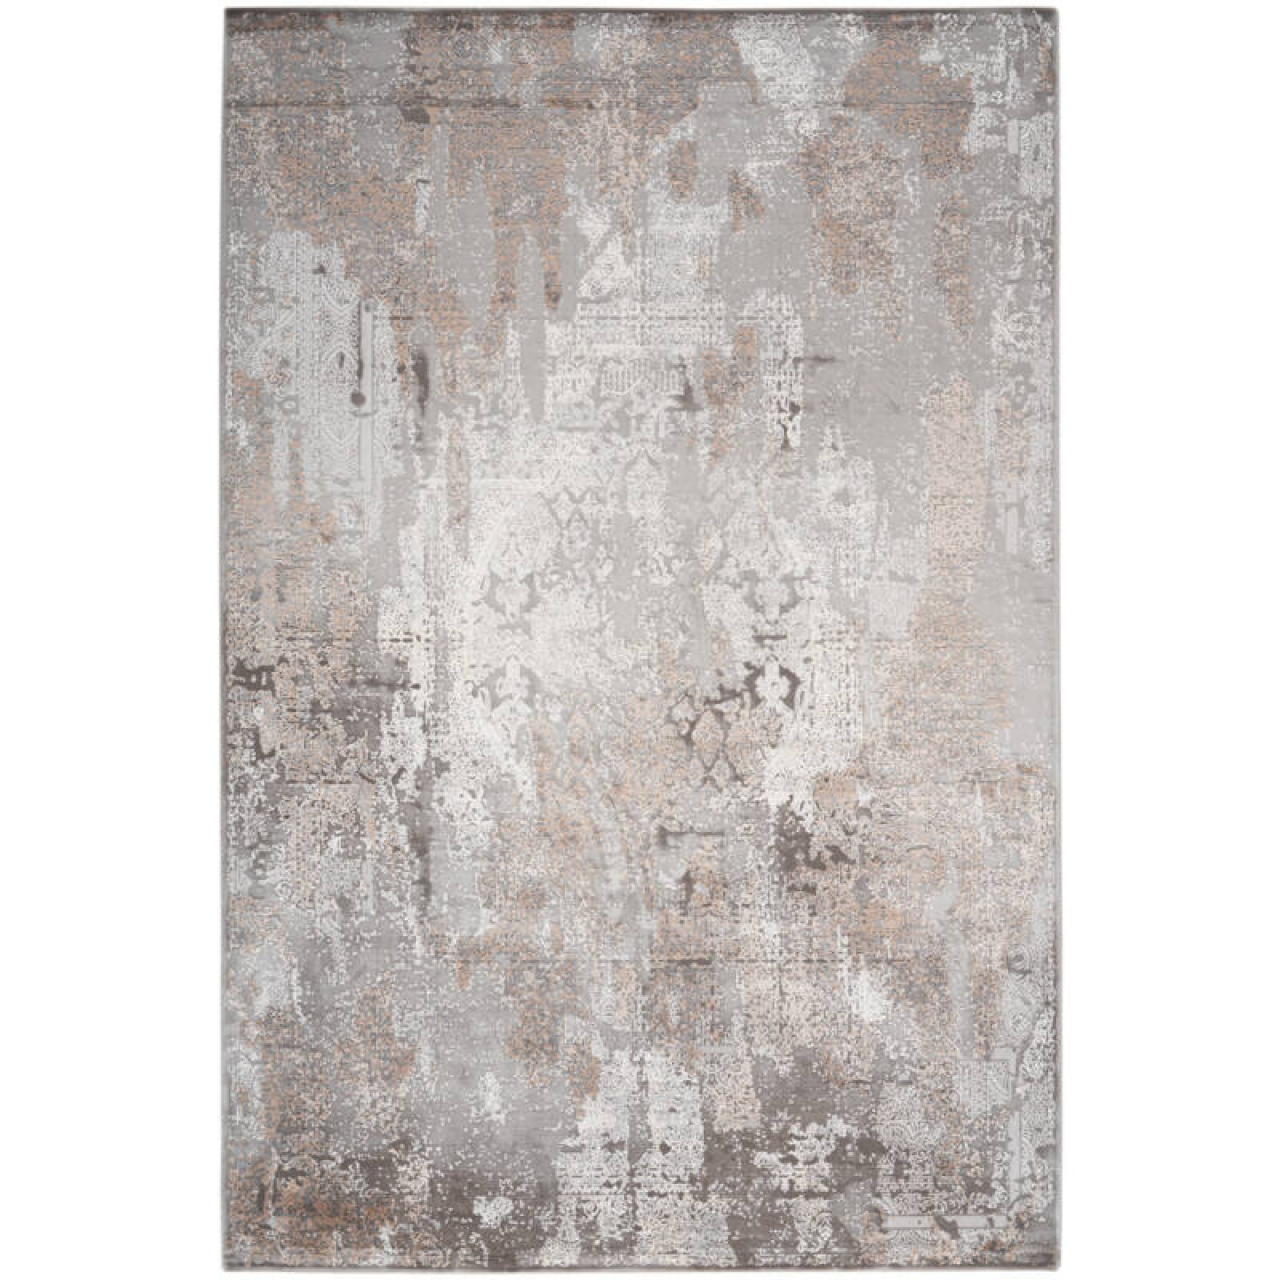 Obsession Haute Couture Jewel 951 Taupe szőnyeg-160x230